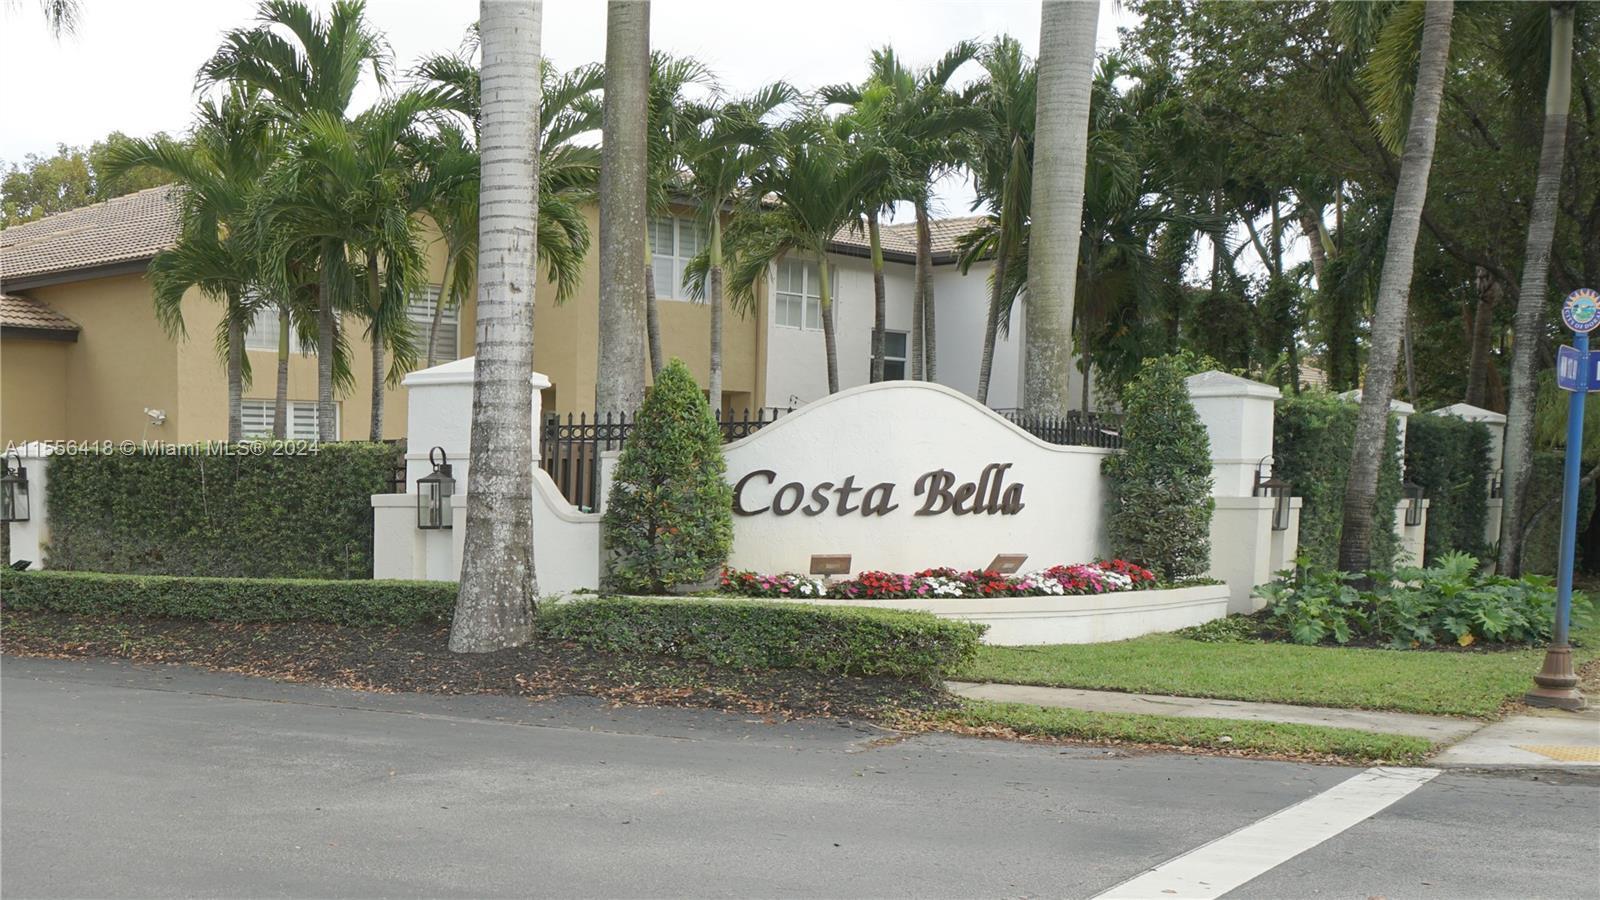 Photo of Address Not Disclosed in Doral, FL